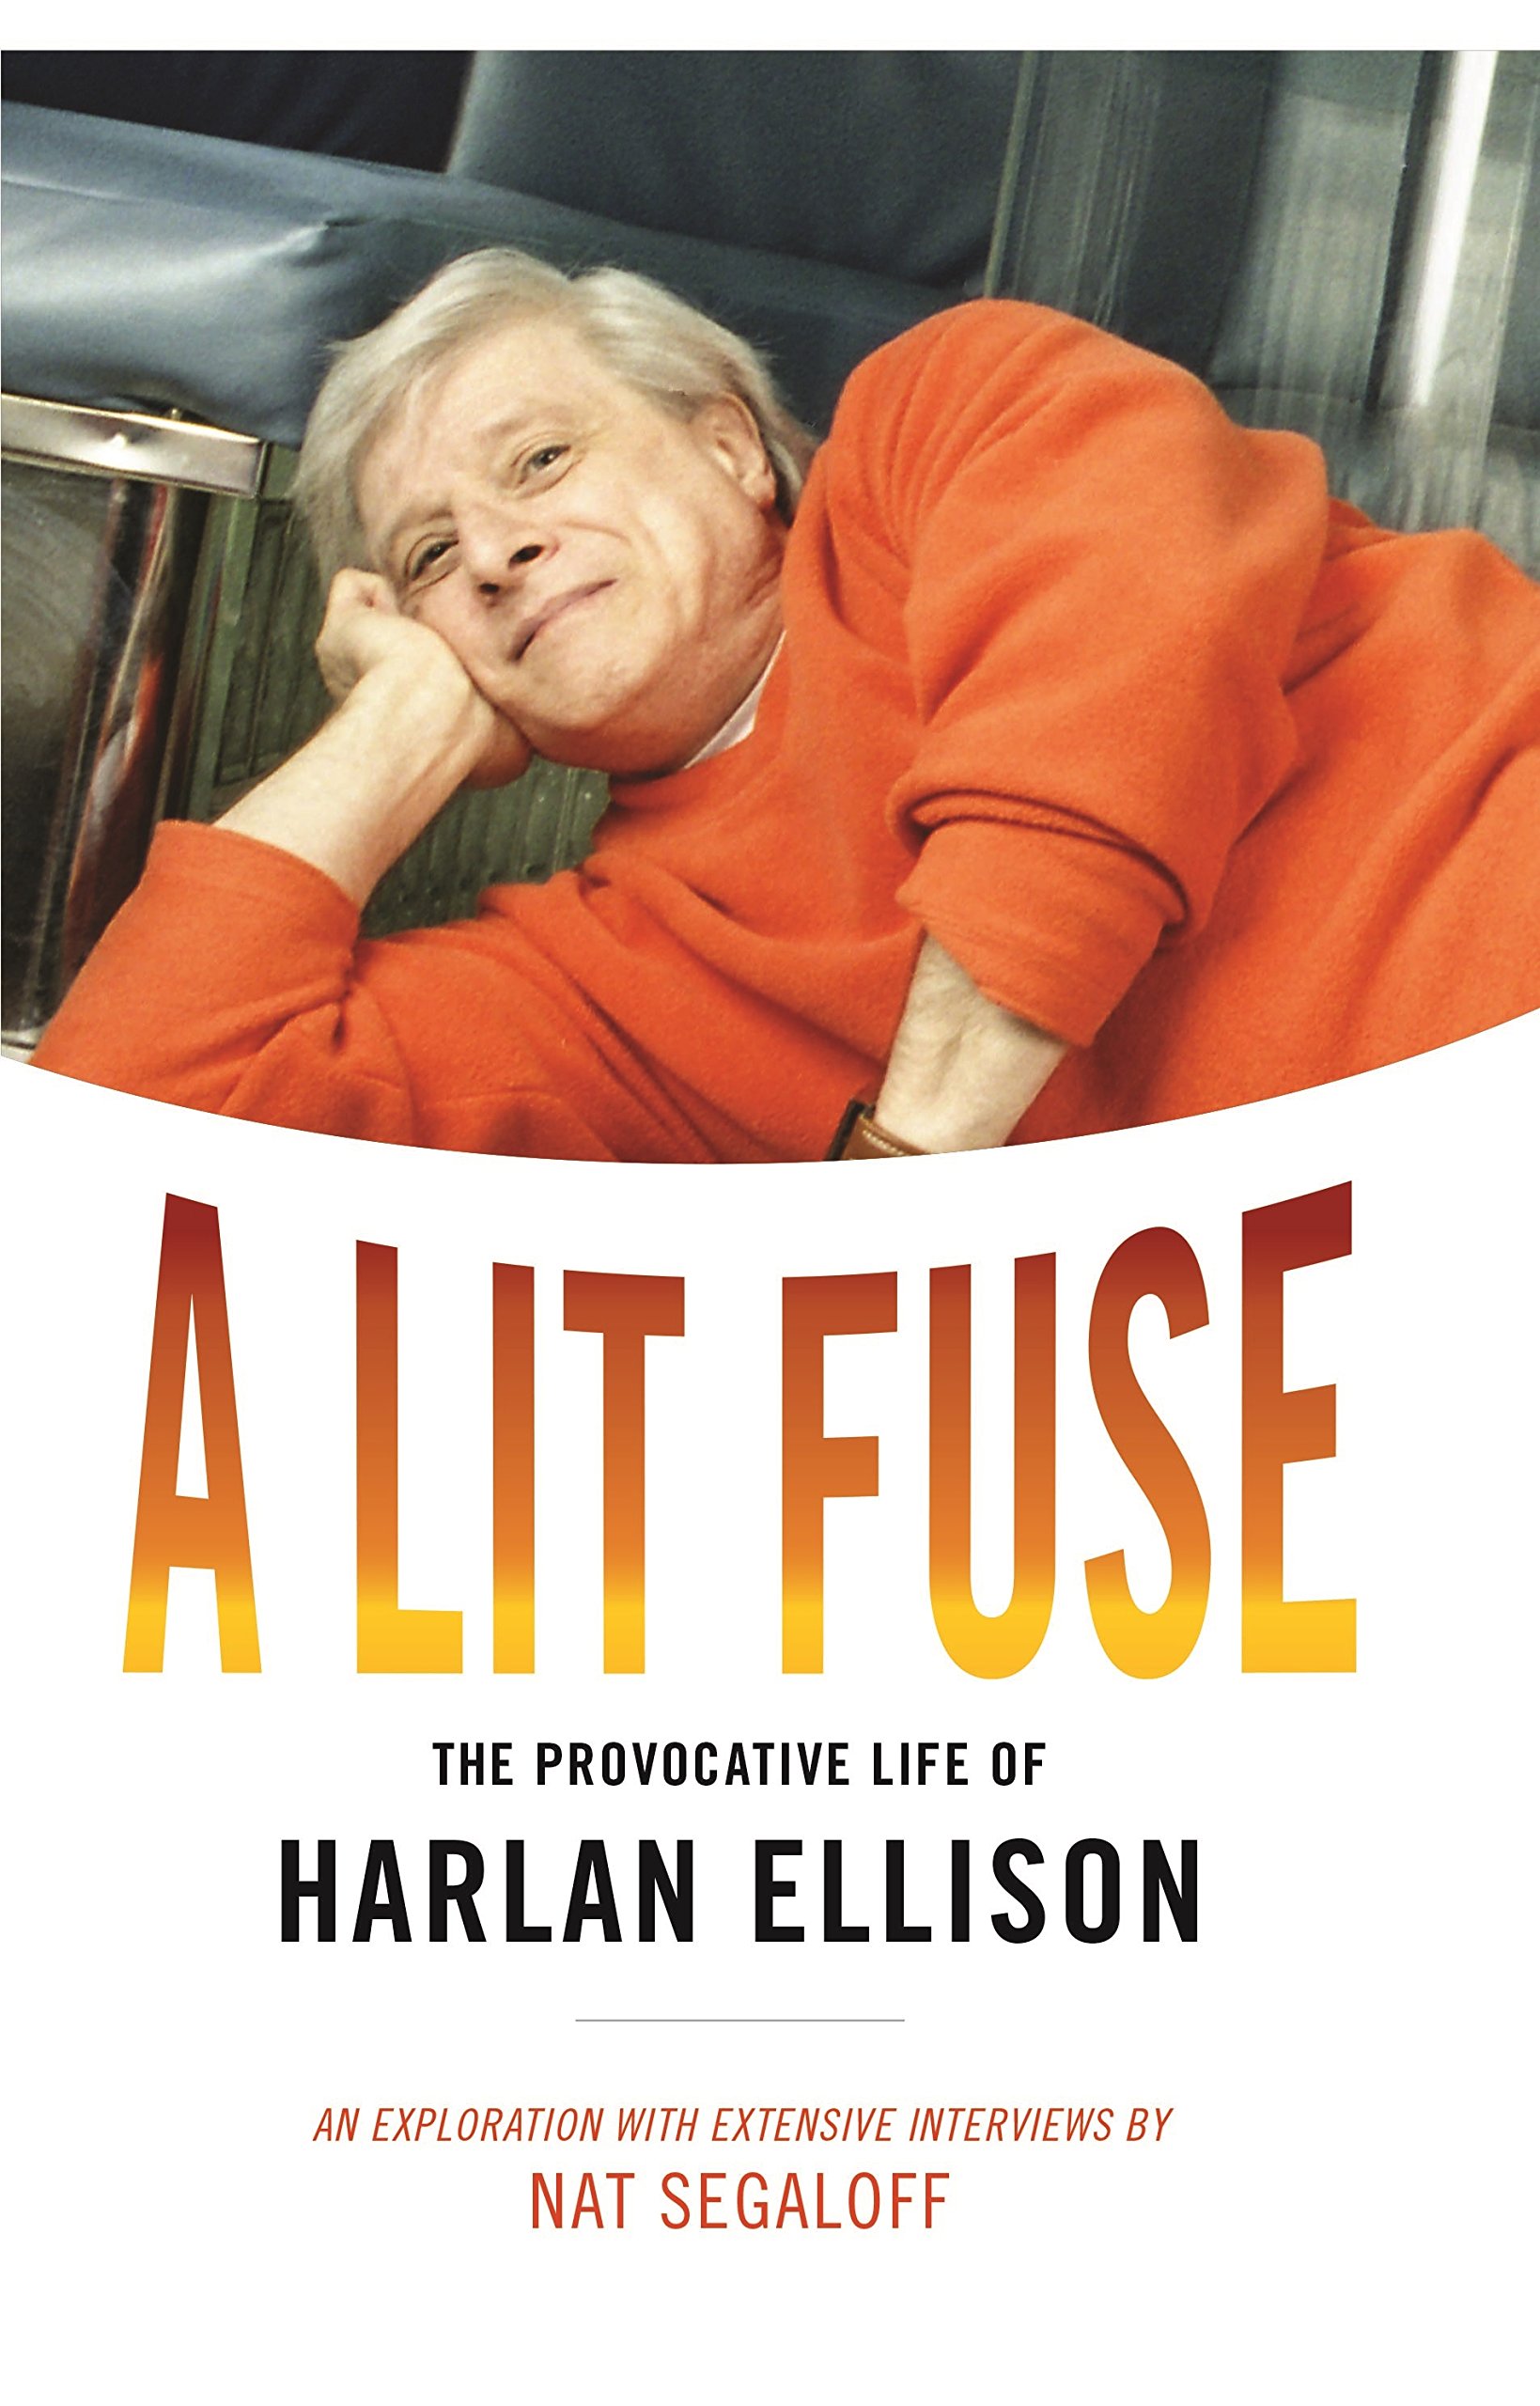 Friday Reads: A Lit Fuse: The Provocative Life of Harlan Ellison by Nat Segaloff